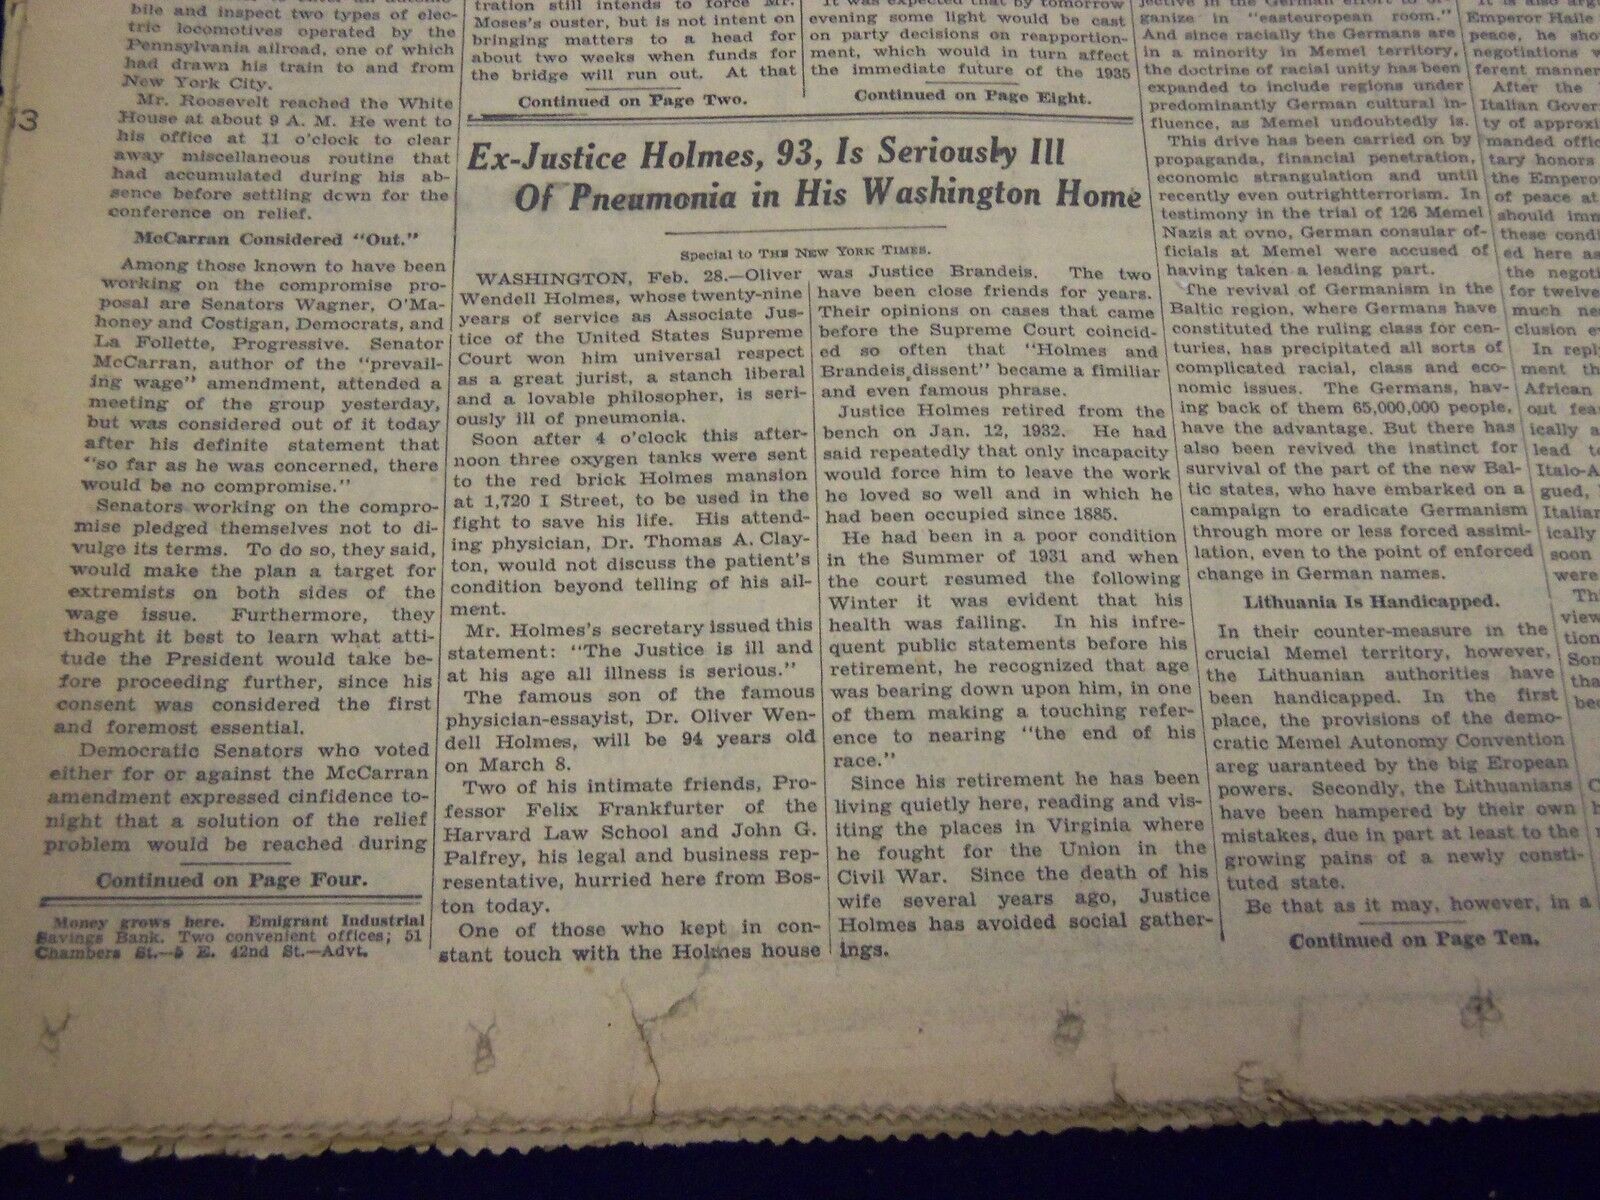 1935 MARCH 1 NEW YORK TIMES - JUSTICE HOLMES 93 SERIOUSLY ILL - NT 3818